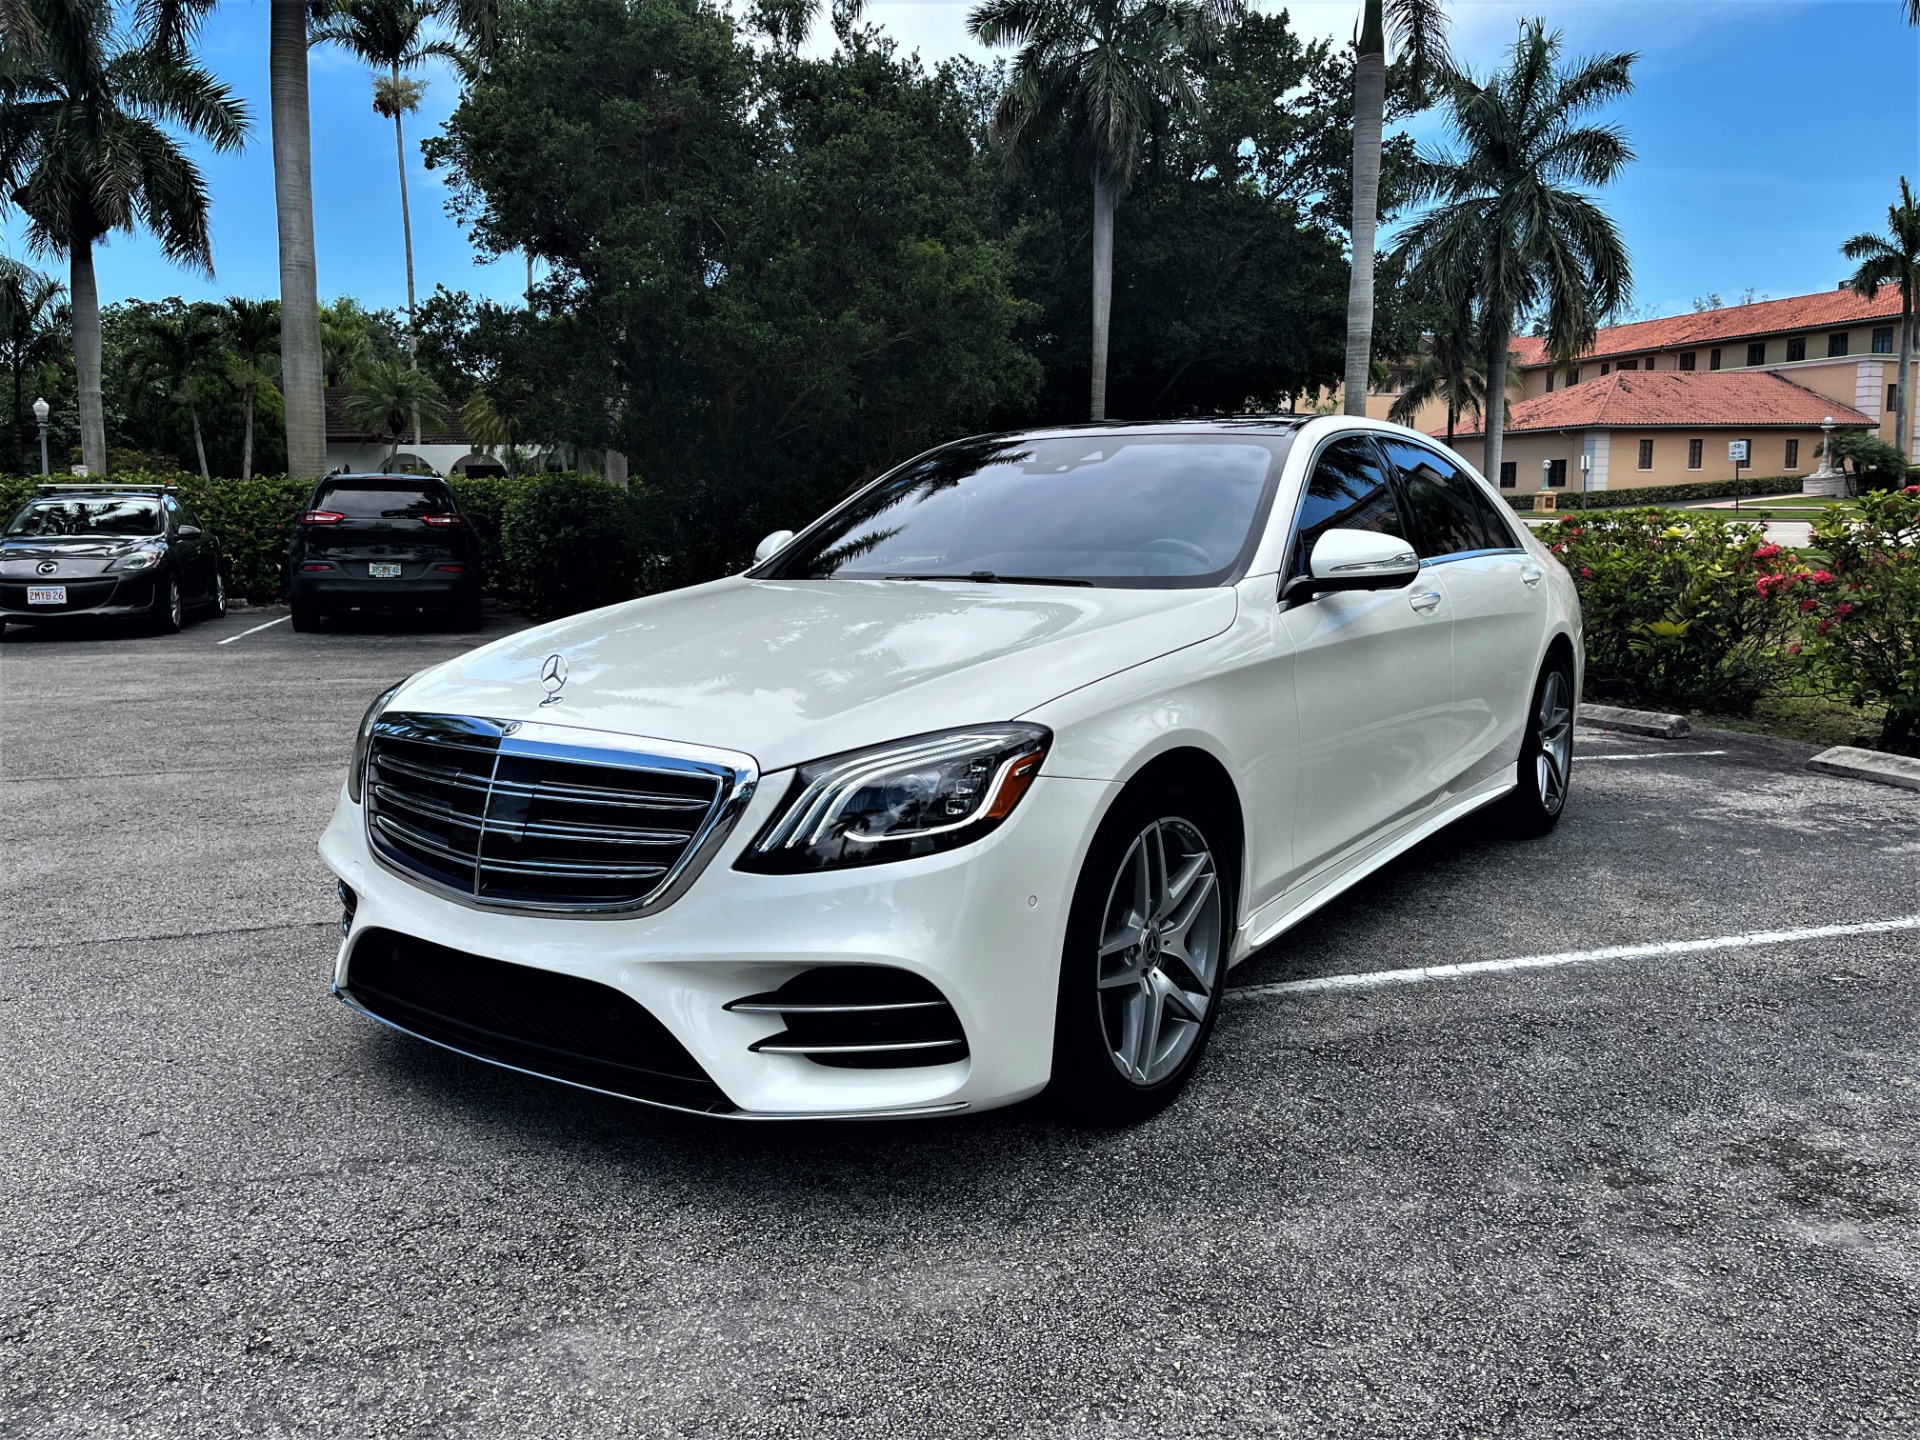 Used 2019 Mercedes-Benz S-Class S 560 4MATIC for sale Sold at The Gables Sports Cars in Miami FL 33146 4